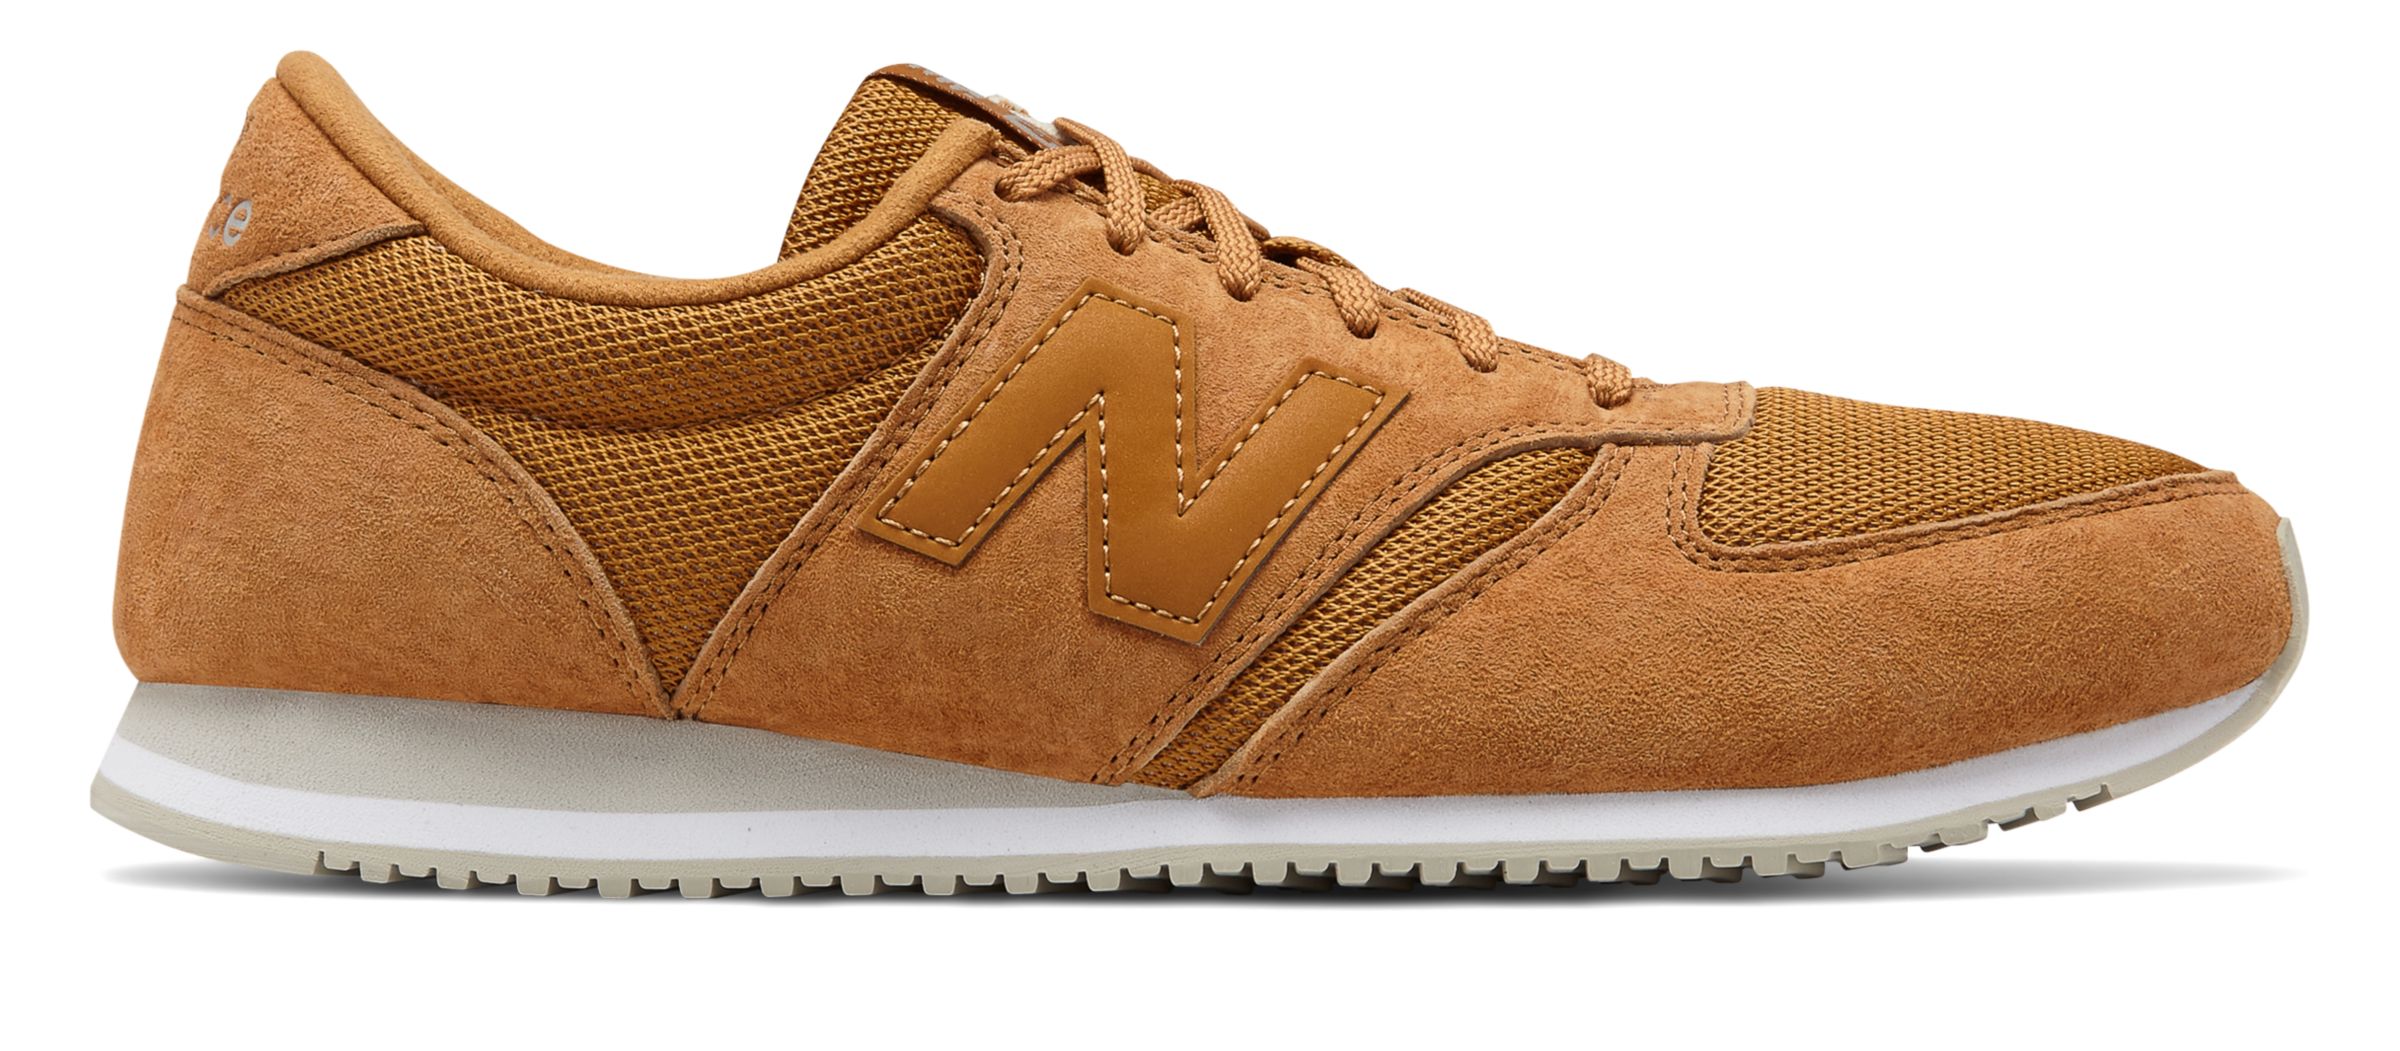 Are All New Balance Sneakers Made With Pigskin?